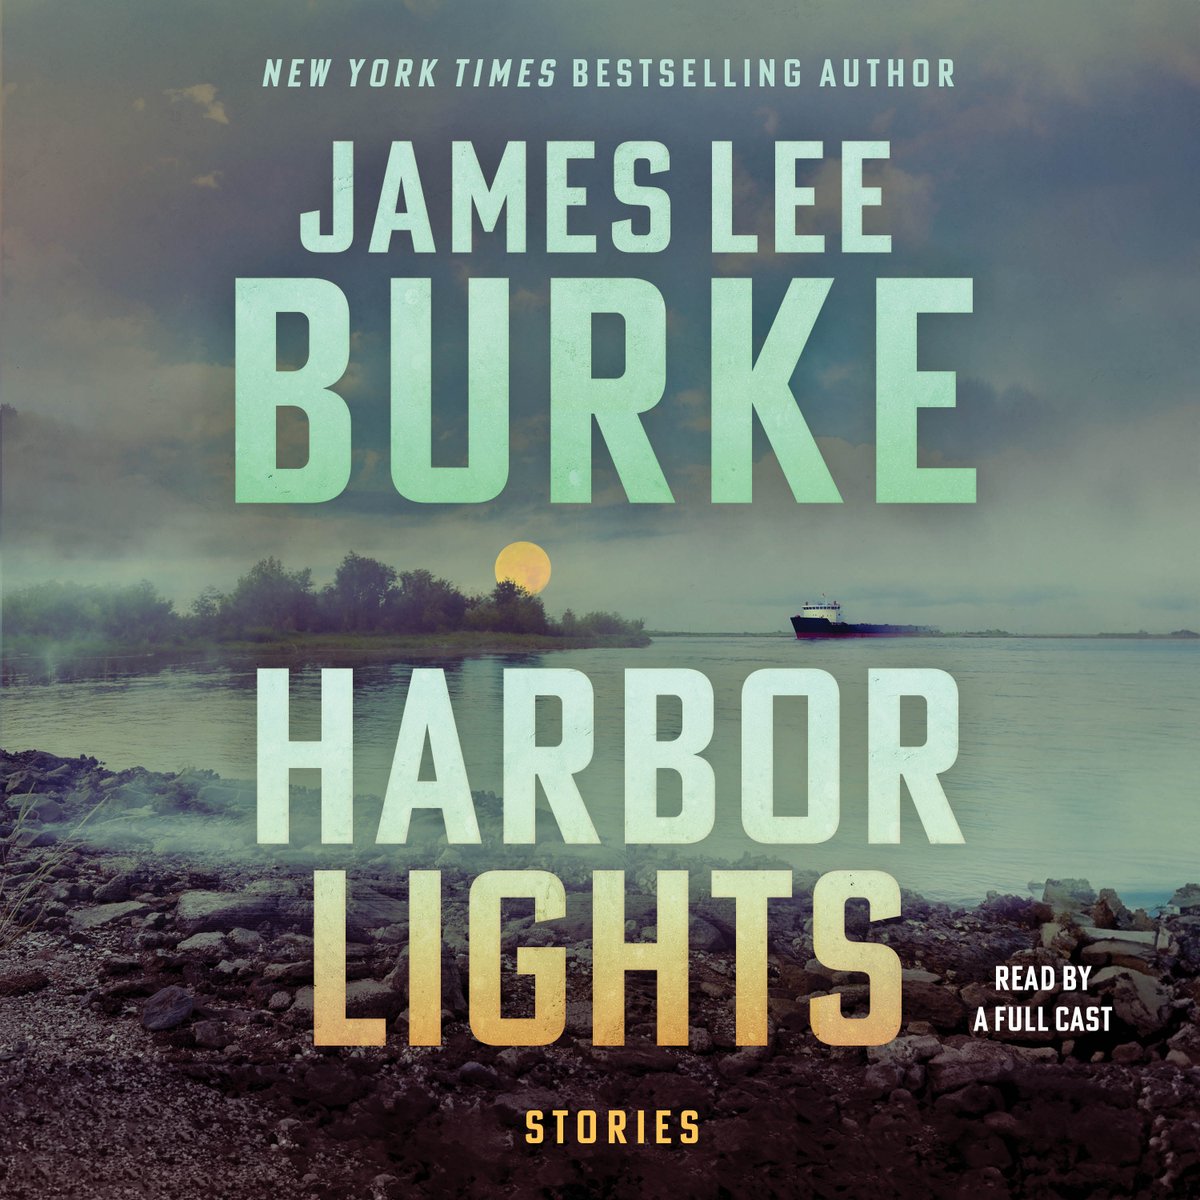 HARBOR LIGHTS will be available Jan. 23 as an audiobook (as well as print + ebook) from @SimonAudio, read by a full cast including Gary Furlong, Matt Pittenger, Michael David Axtell, Ali Andre Ali, Alan Carlson, Kaleo Griffith, Leon Nixon, and Zac Aleman. jamesleeburke.com/books/harbor-l…